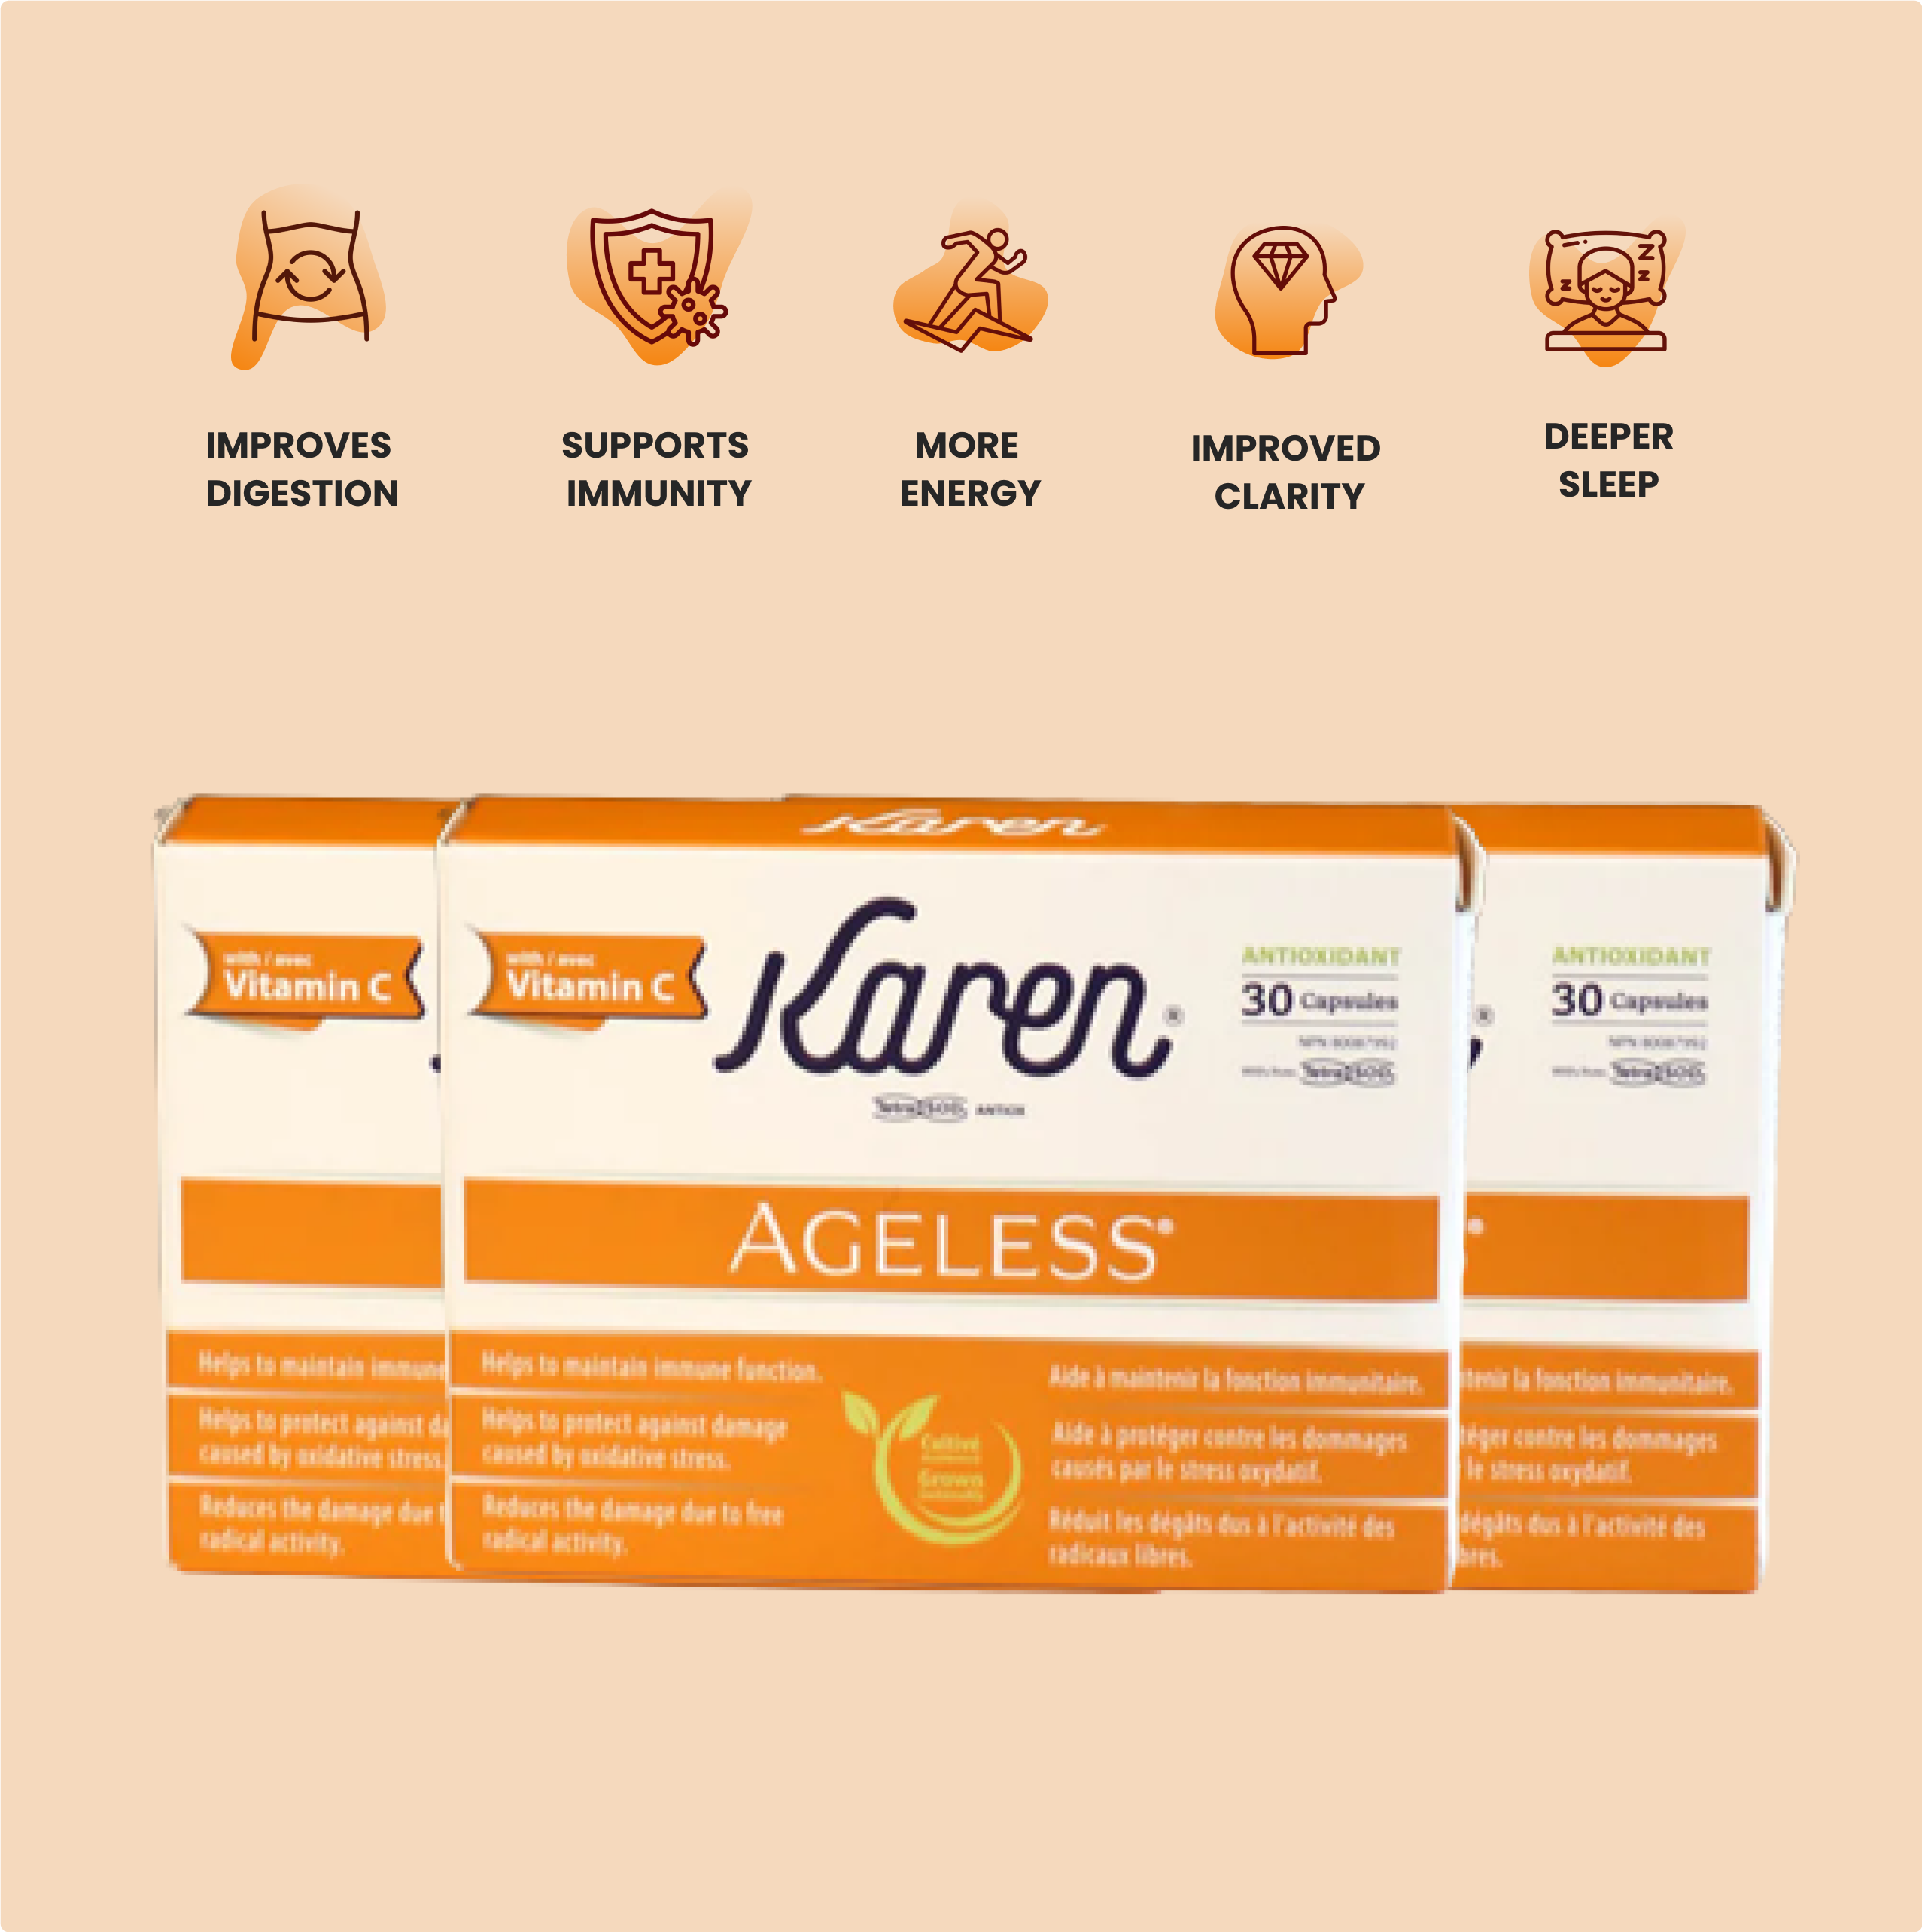 Boxes of Karen Ageless supplements with Vitamin C, featuring health benefit icons and descriptions.